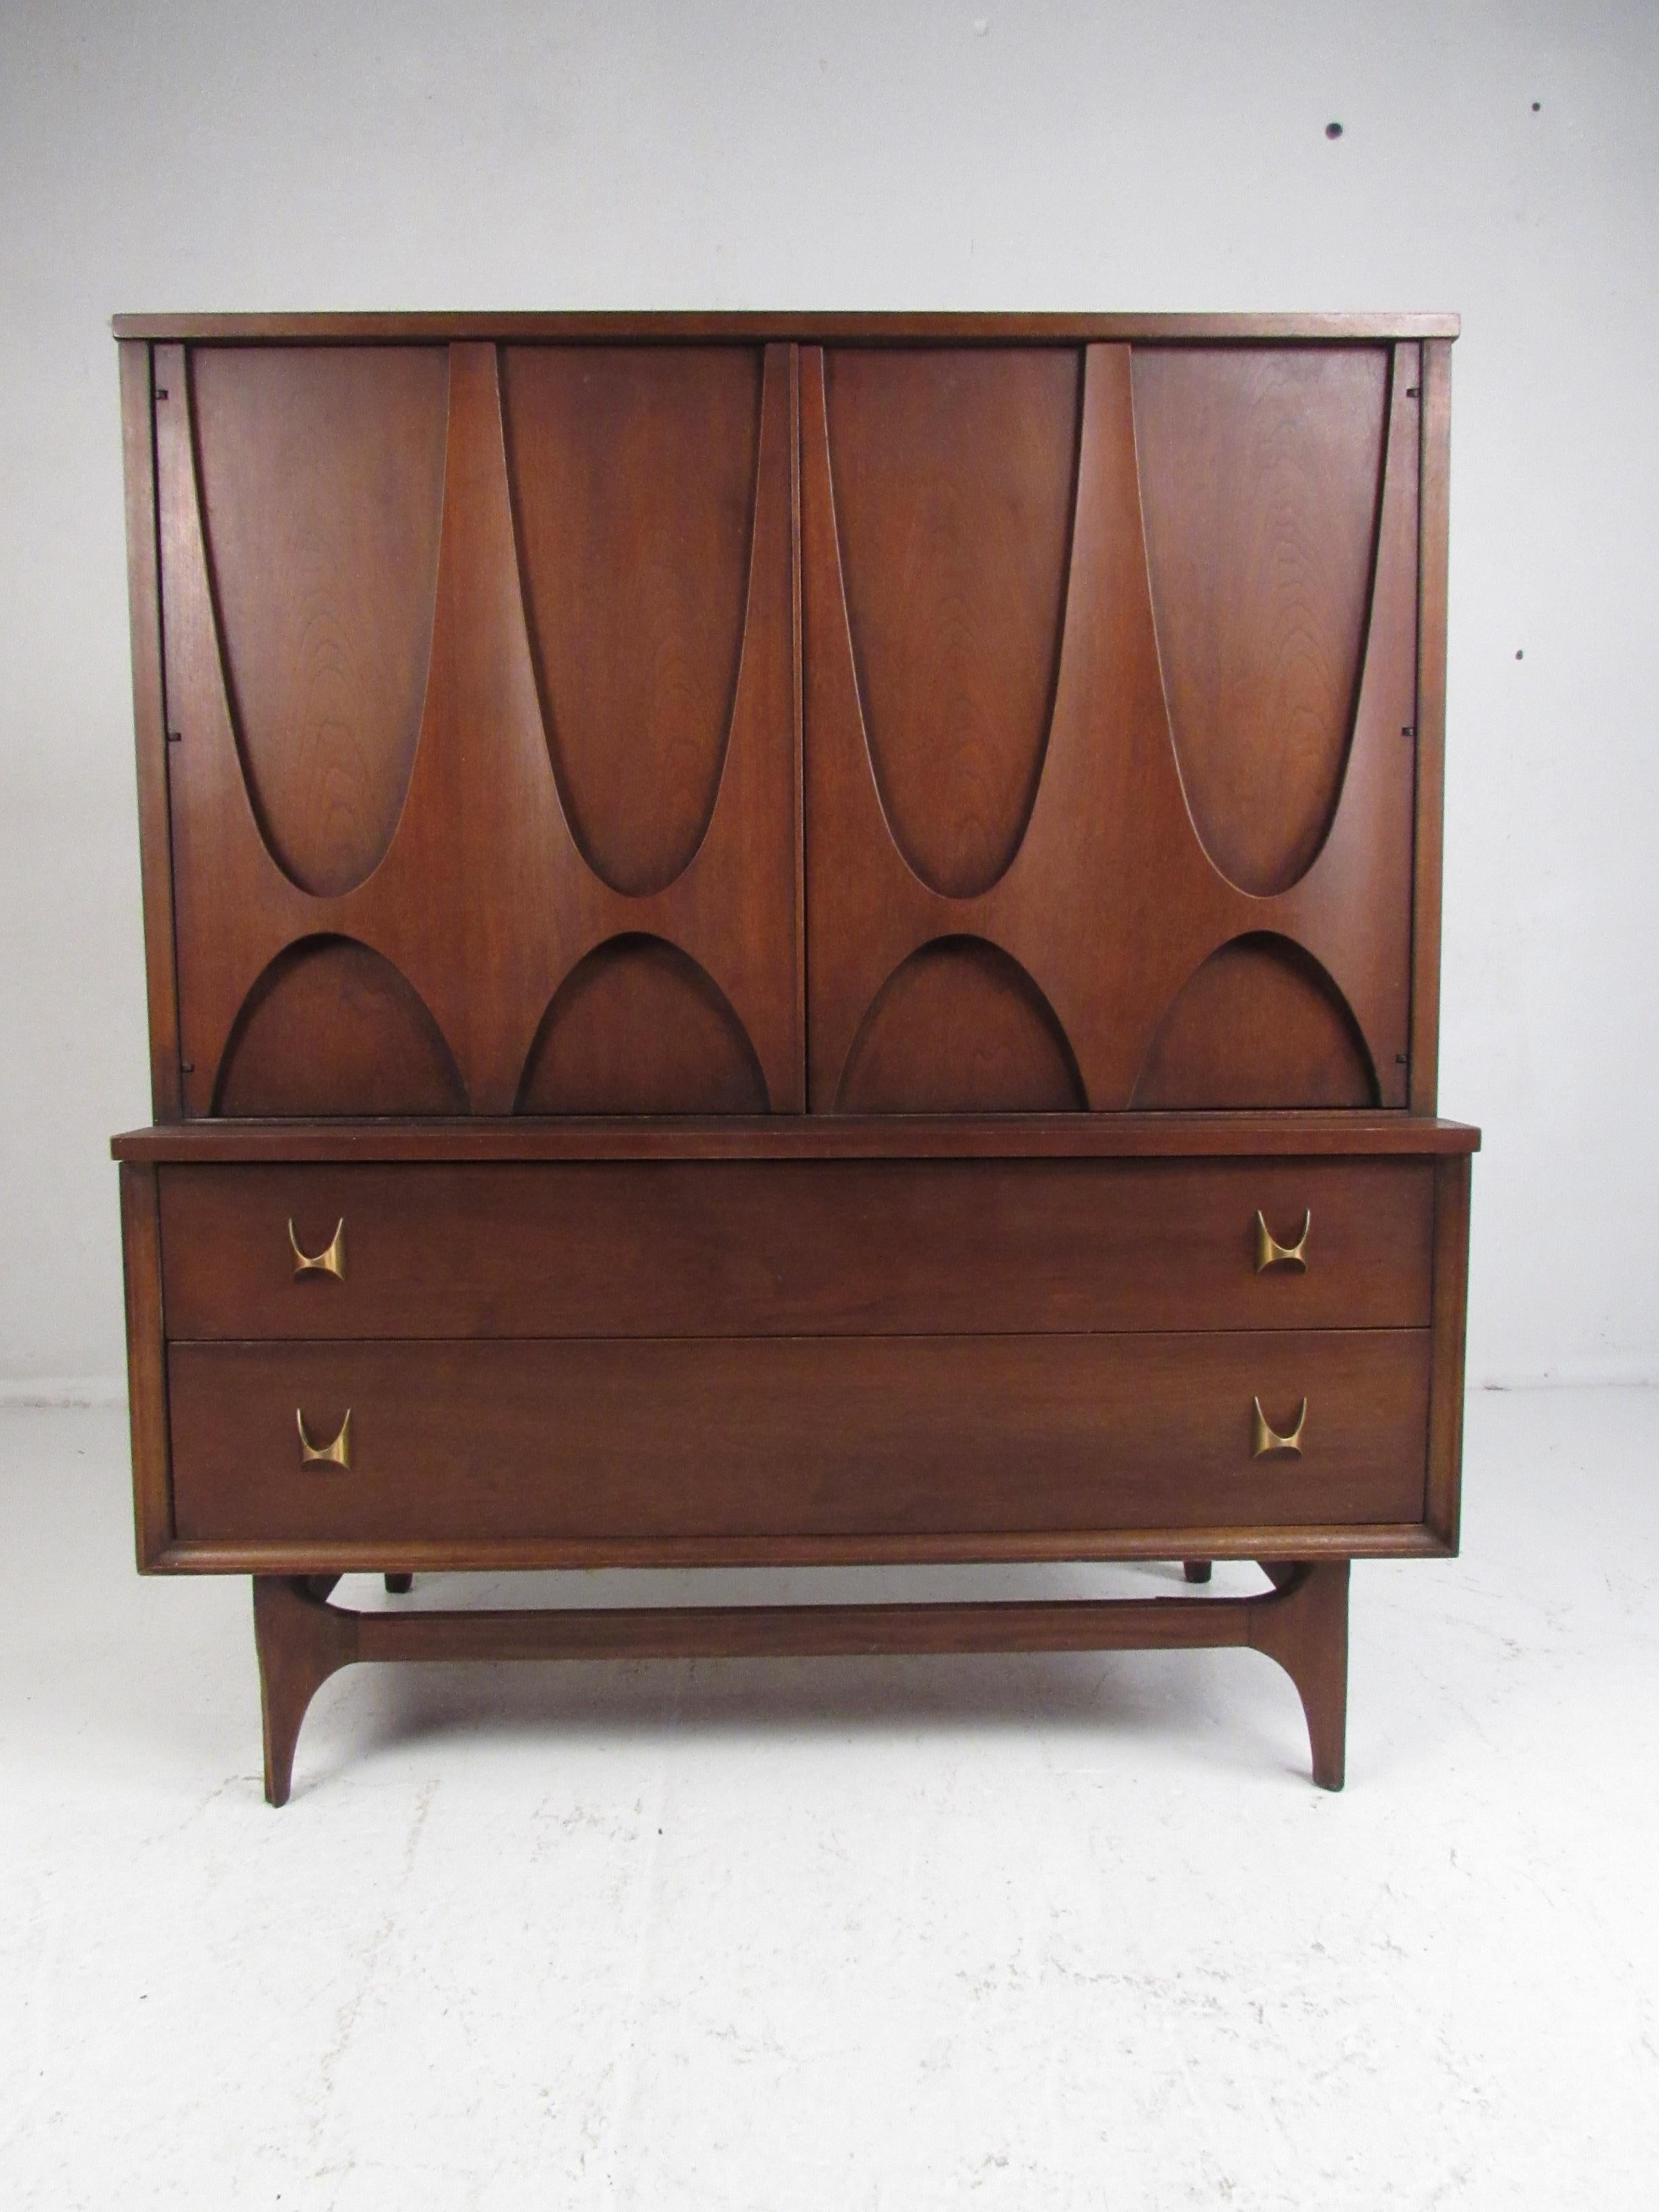 This elegant vintage modern dresser features a Brutalist front, splayed legs, and sculpted brass drawer pulls. A versatile design that offers plenty of room for storage within its many drawers and compartments. The unusual sculpted cabinet pulls and